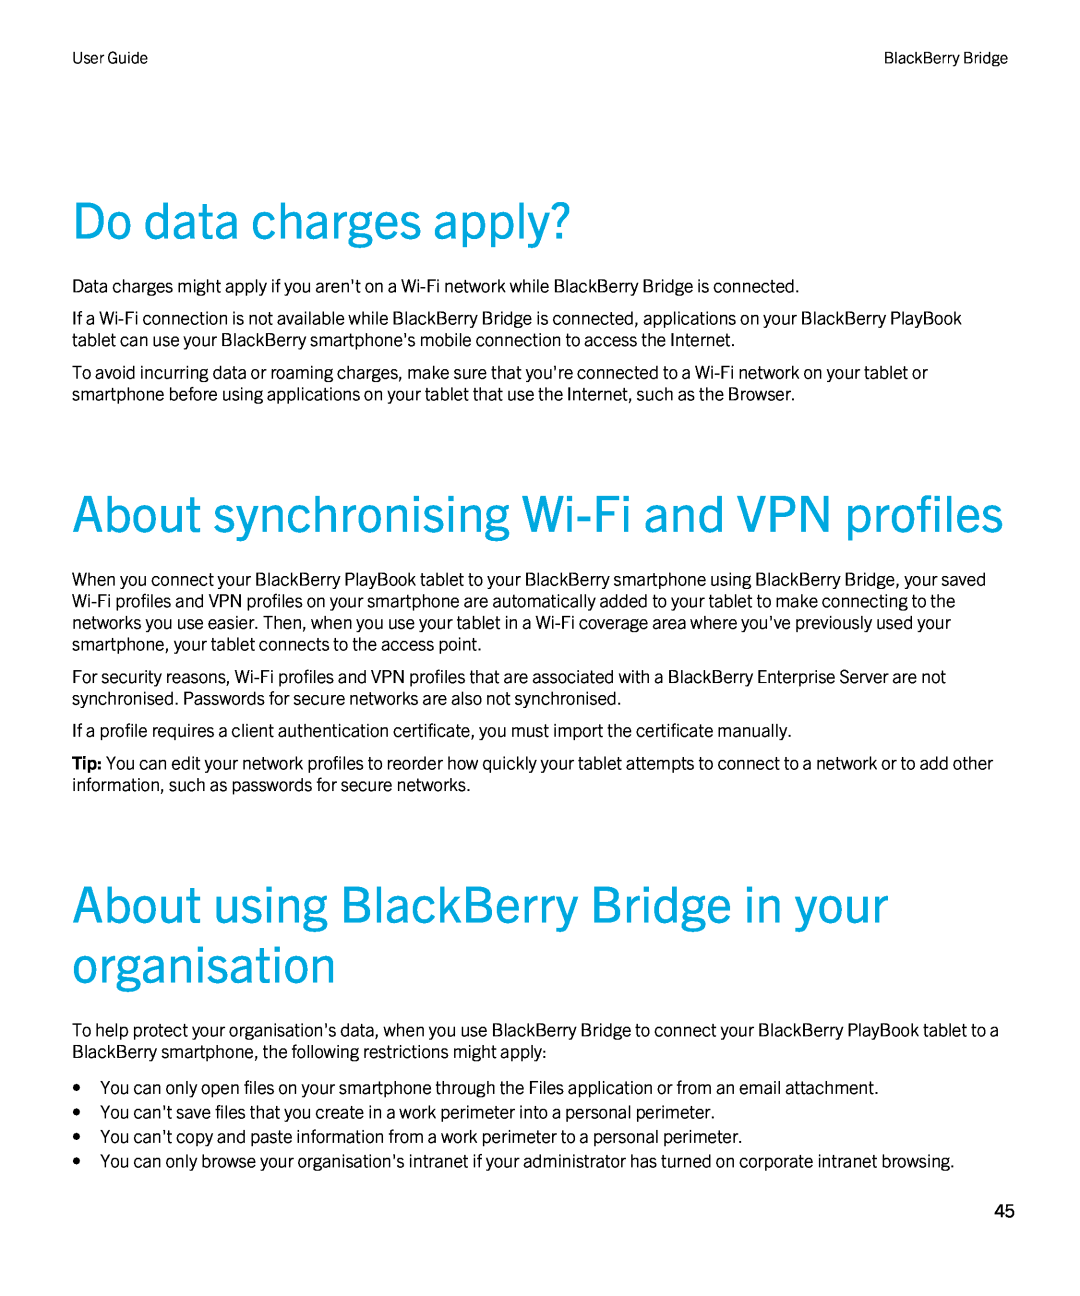 Blackberry 2.0.1 manual Do data charges apply?, About synchronising Wi-Fi and VPN profiles 